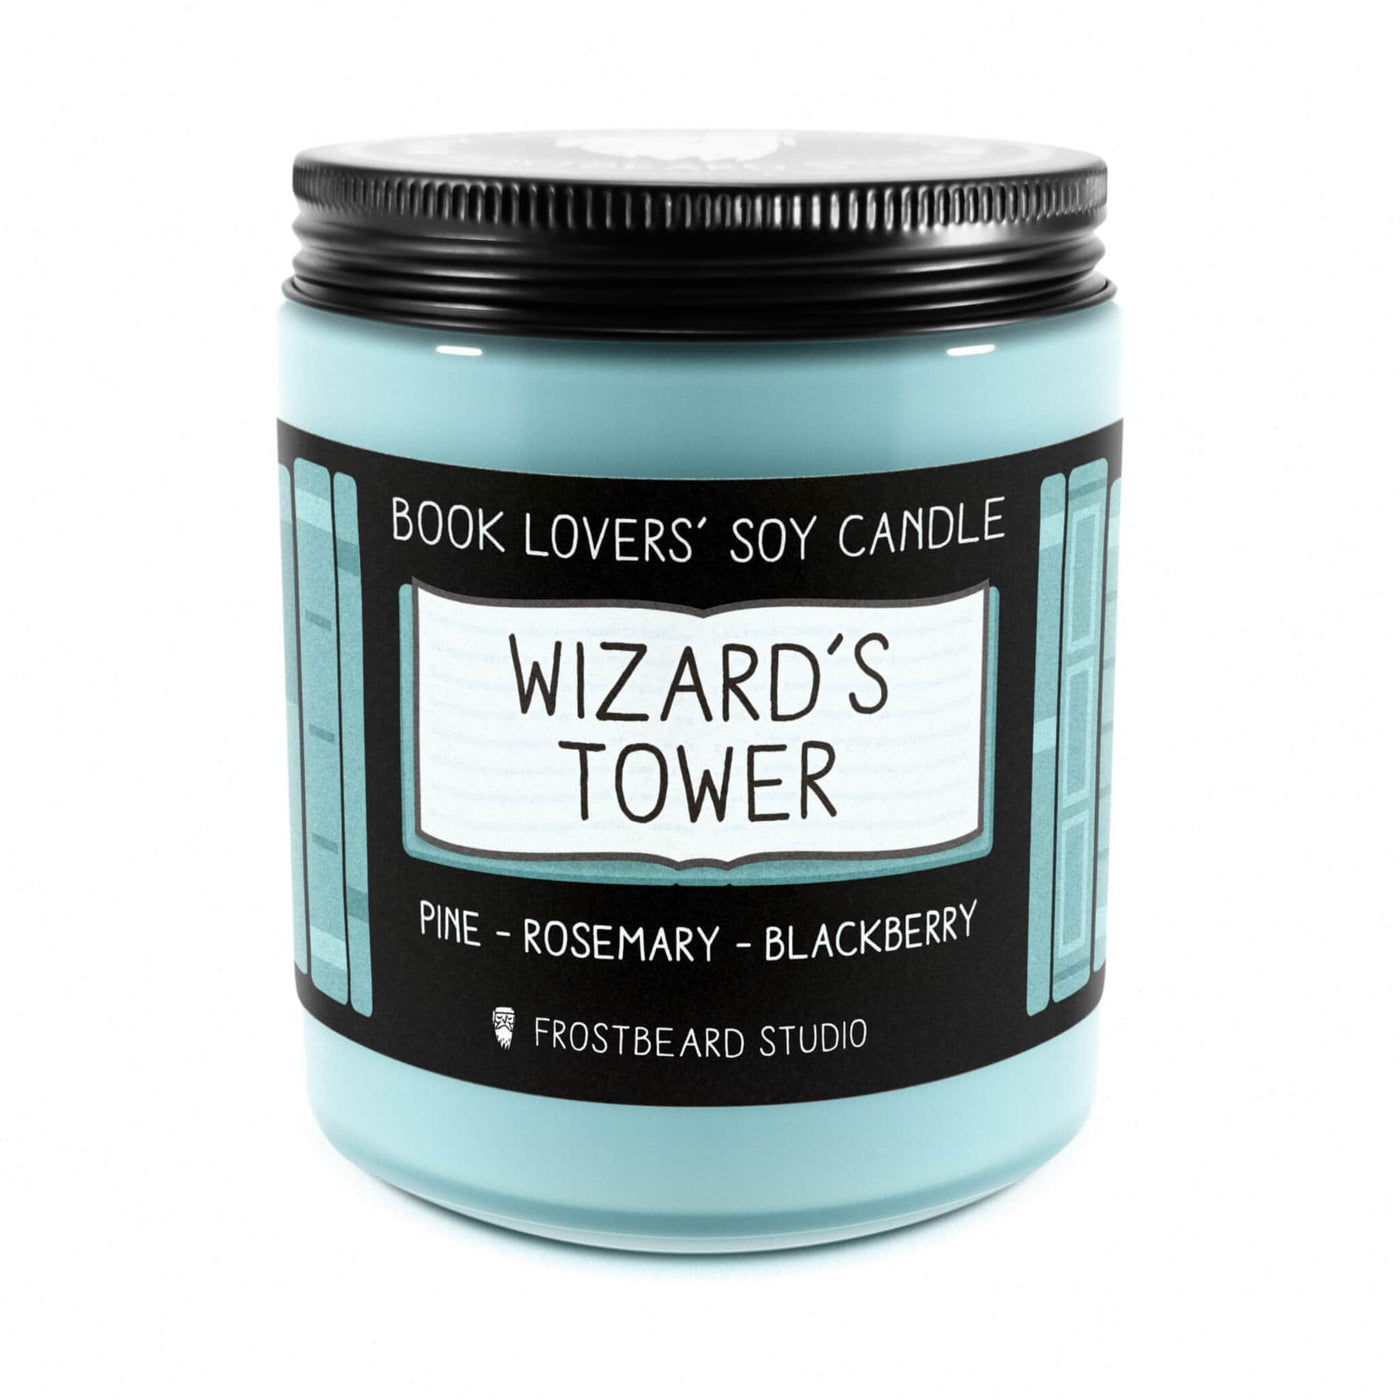 Wizard's Tower  -  8 oz Jar  -  Book Lovers' Soy Candle  -  Frostbeard Studio